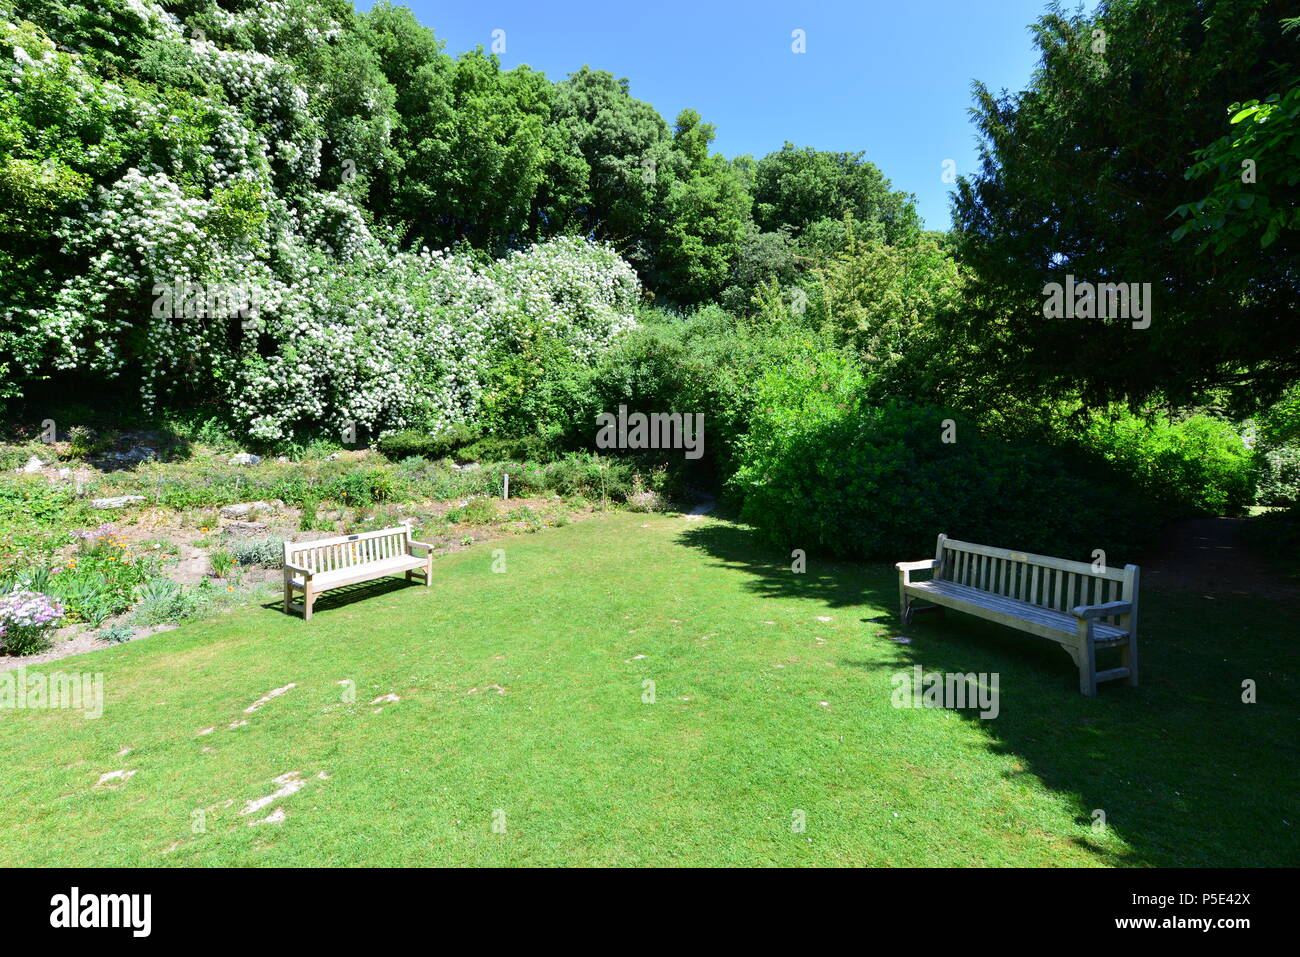 A rest area in an English country garden in summertime. Stock Photo